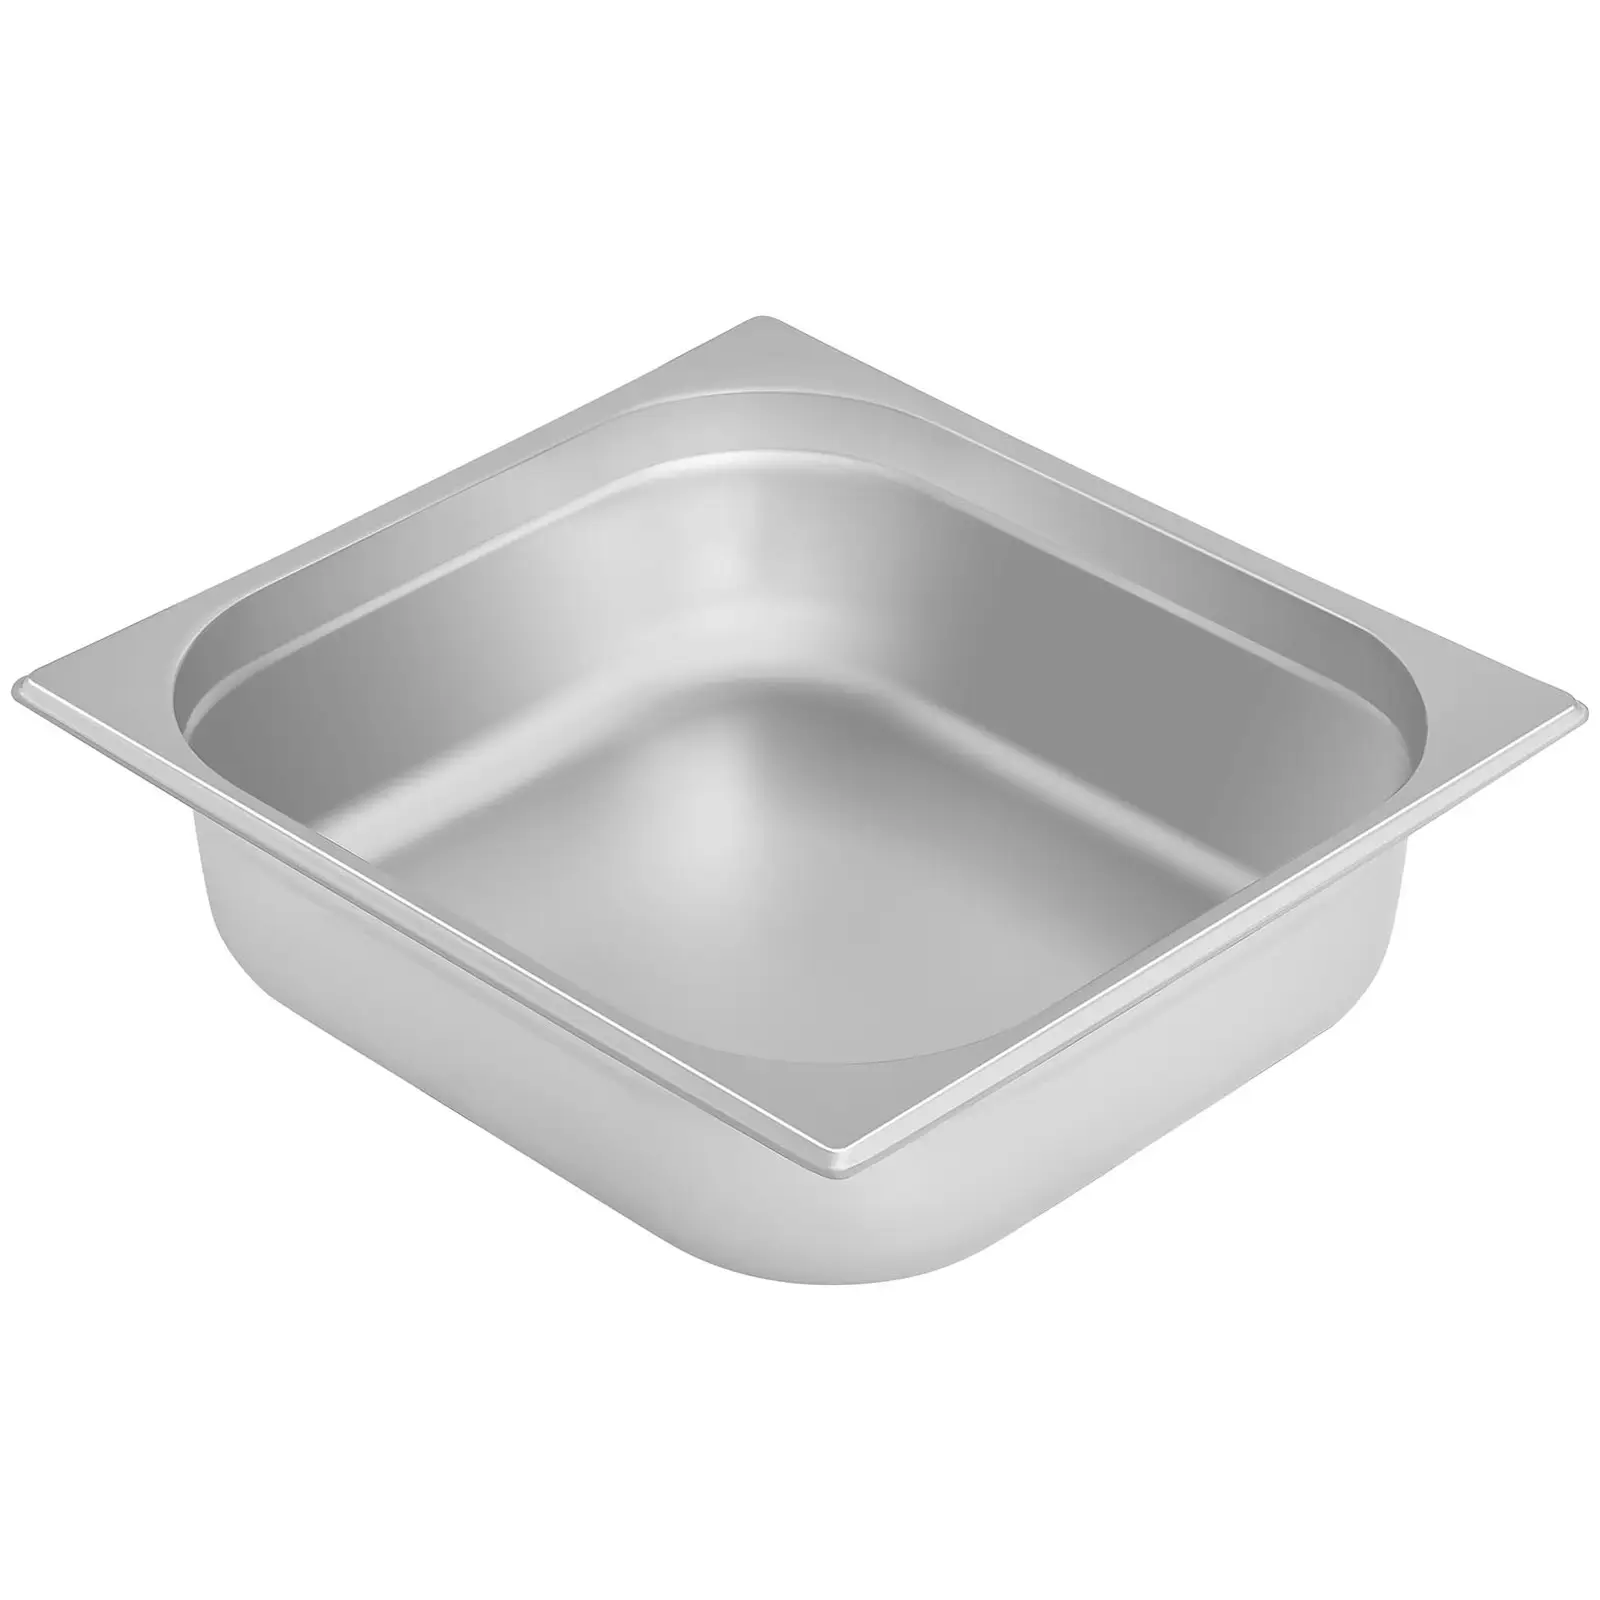 Gastronorm Tray - 2/3 - 100 mm